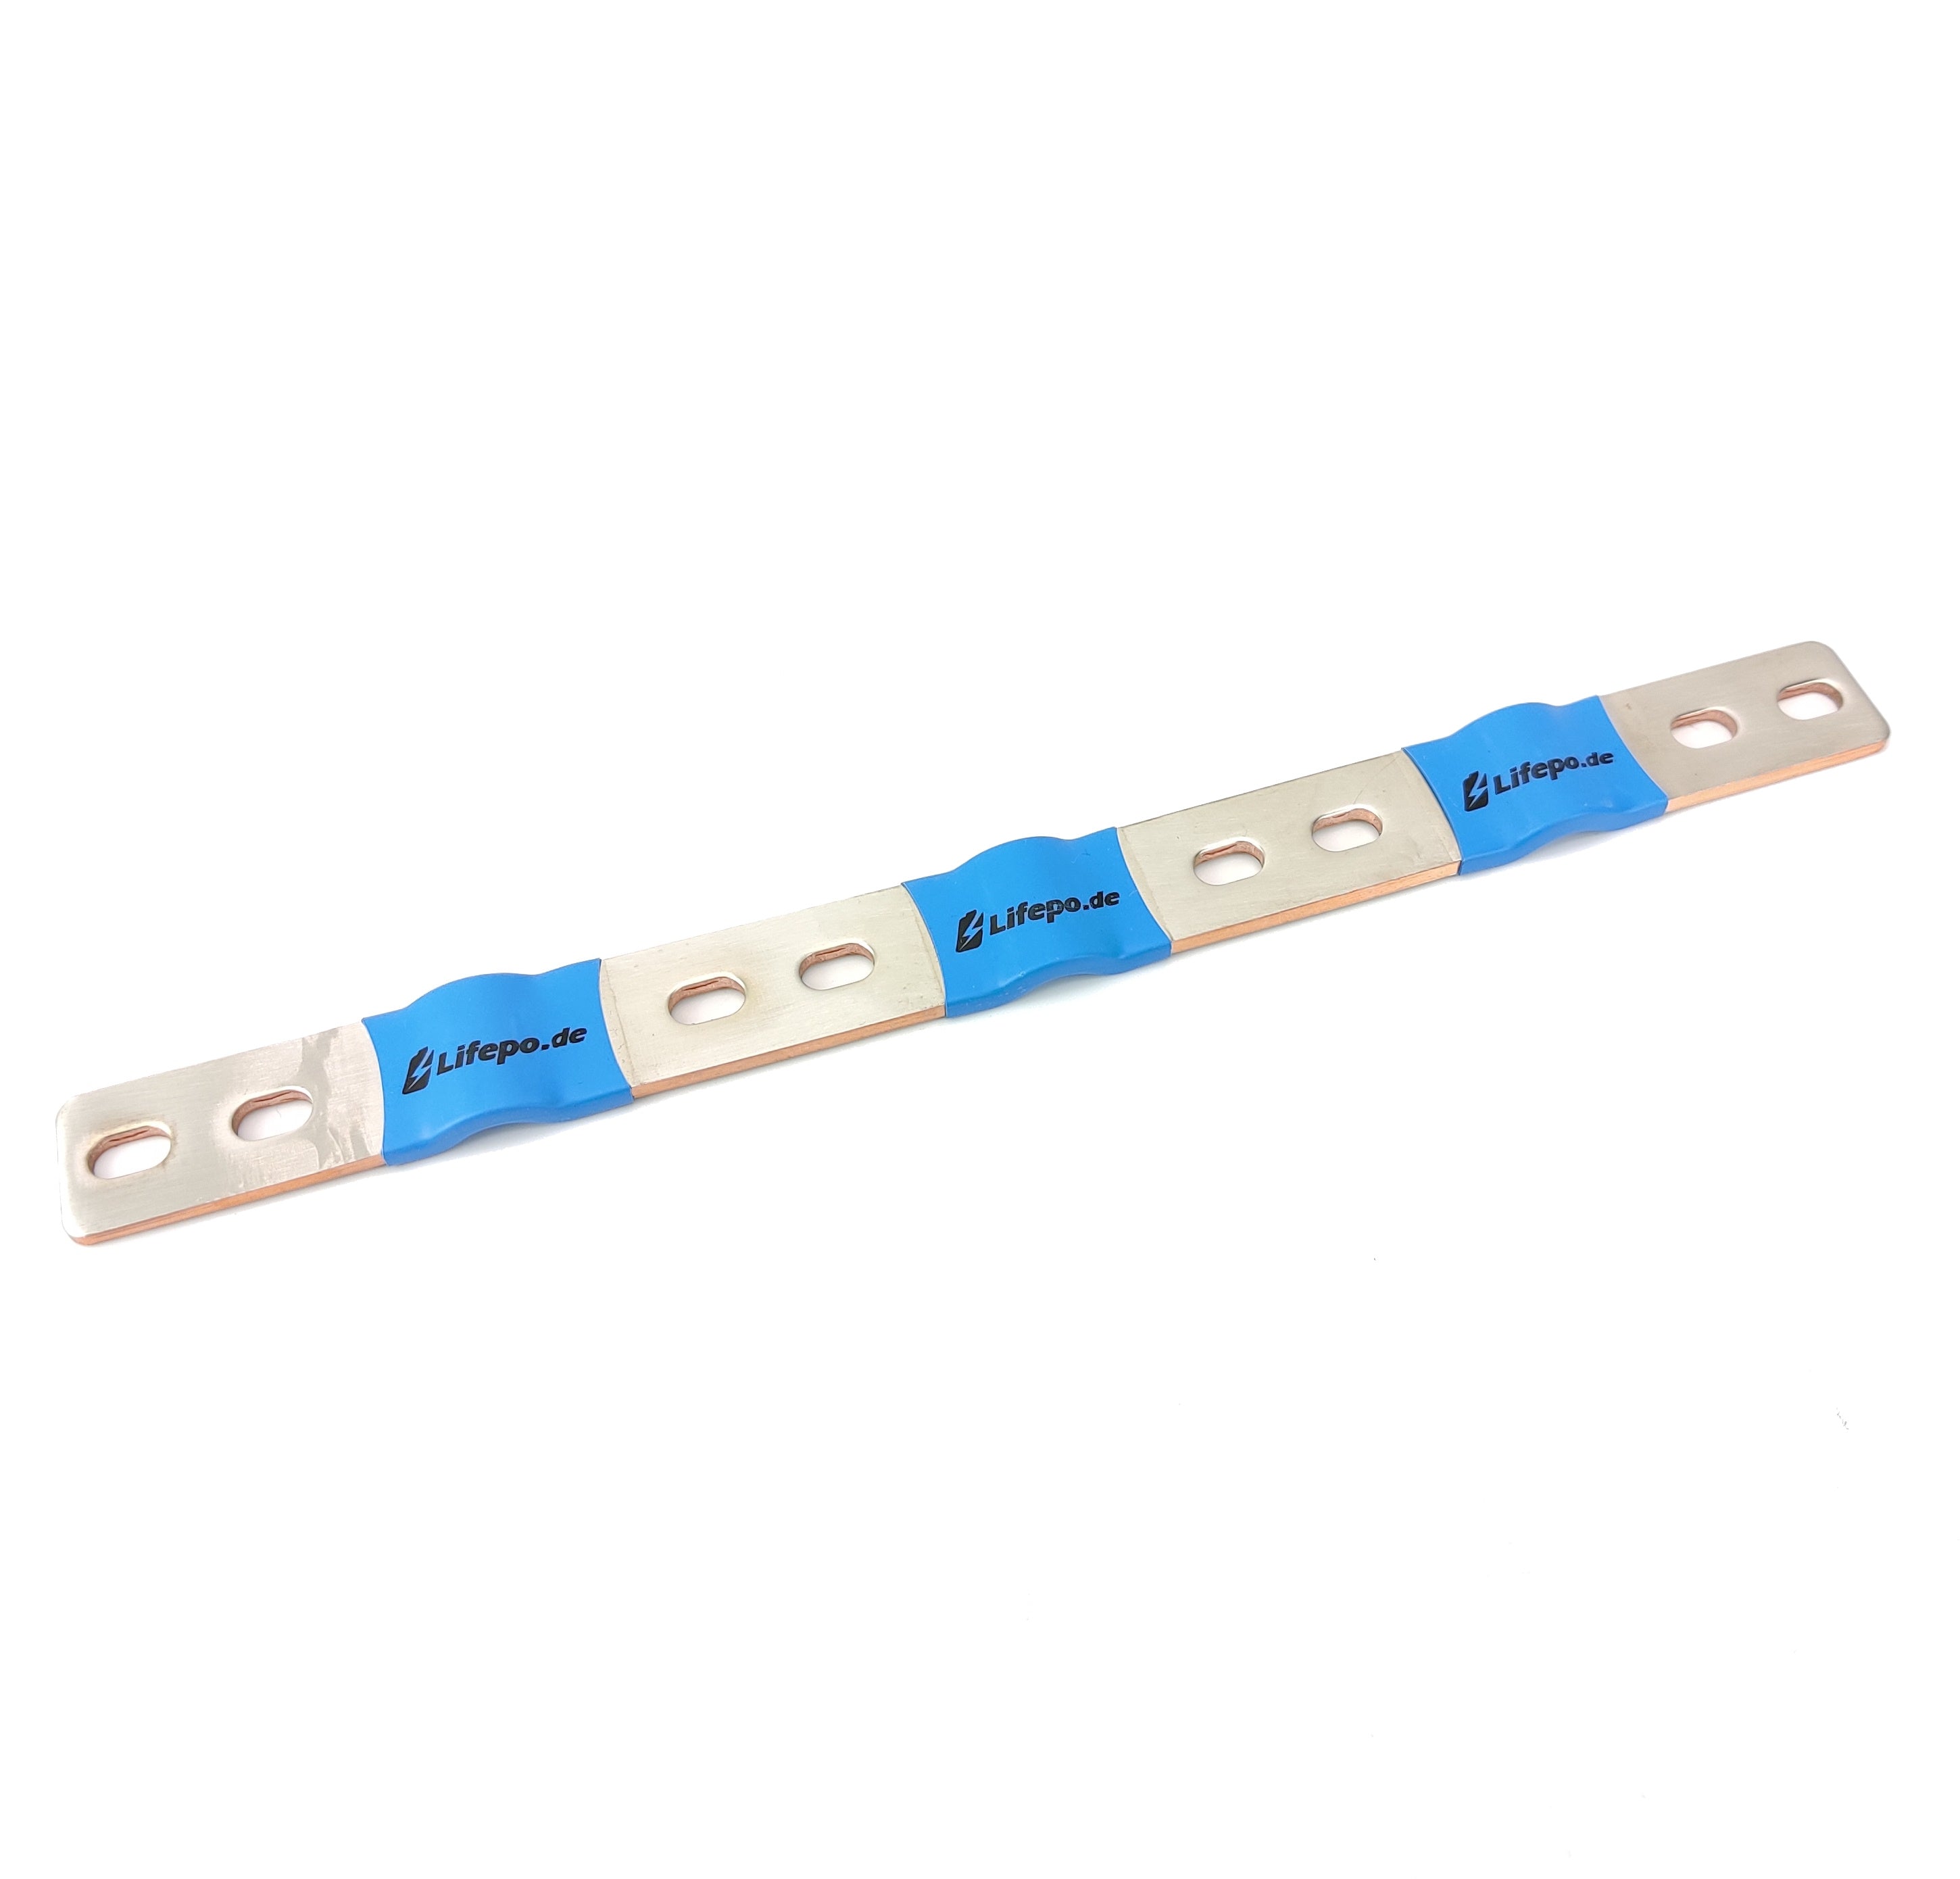 0% VAT Copper connector parallel connection 4x 72mm with the finest fl –